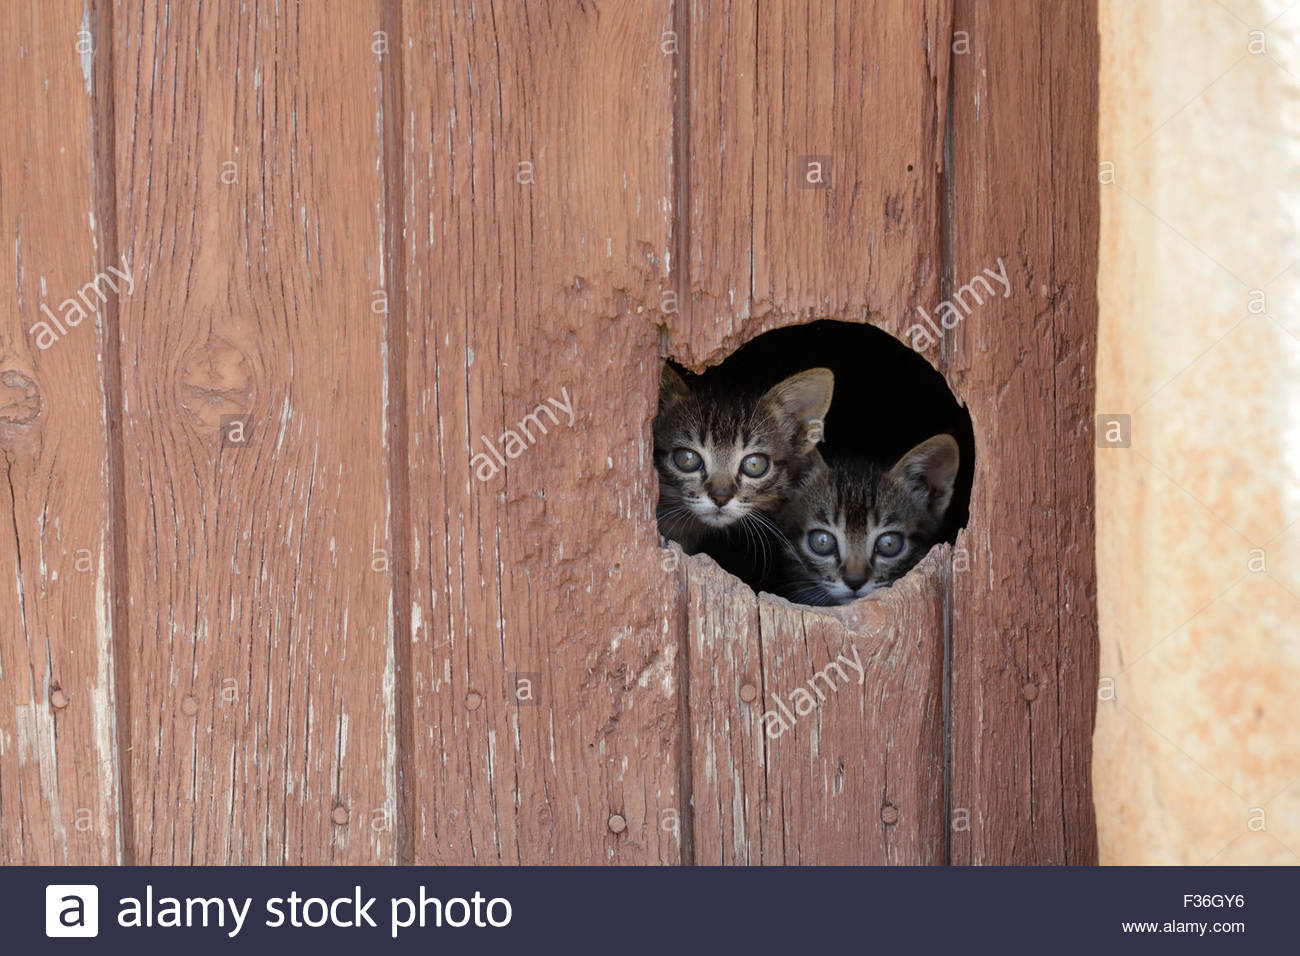 Two little cats looking trough a cat hole in a door.